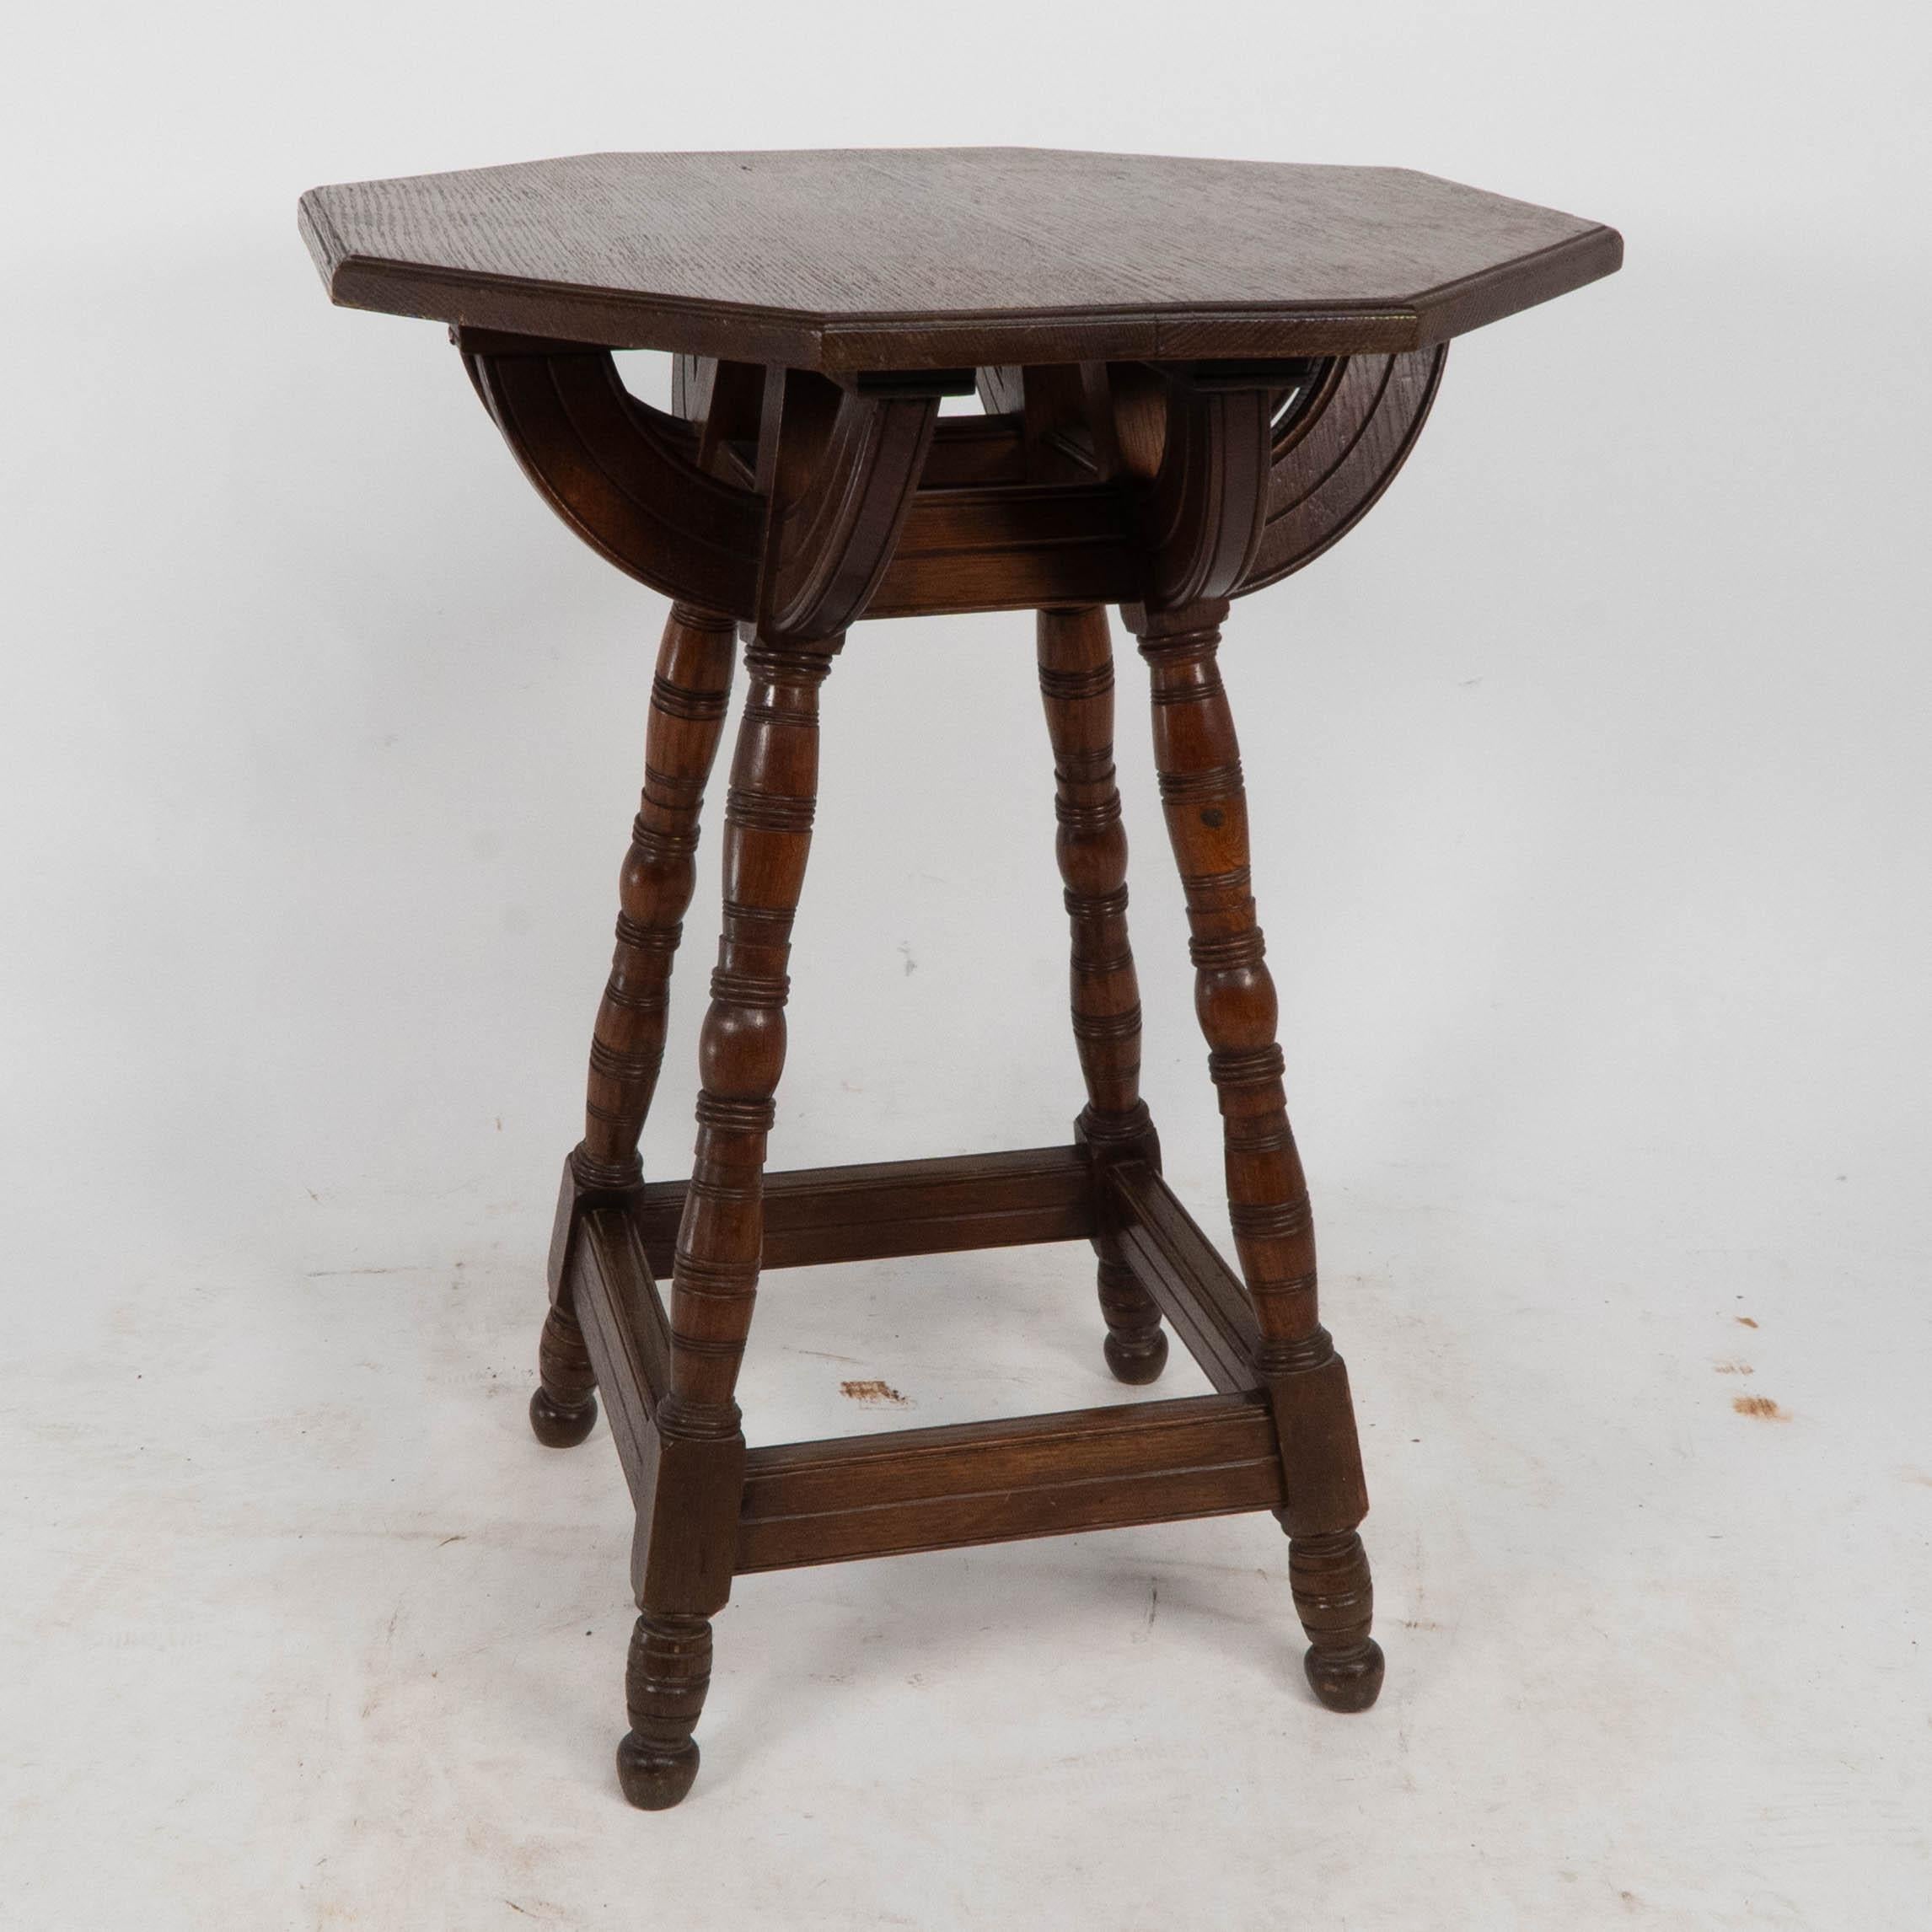 Collier and Plucknett. A rare Gothic Revival oak side table For Sale 1